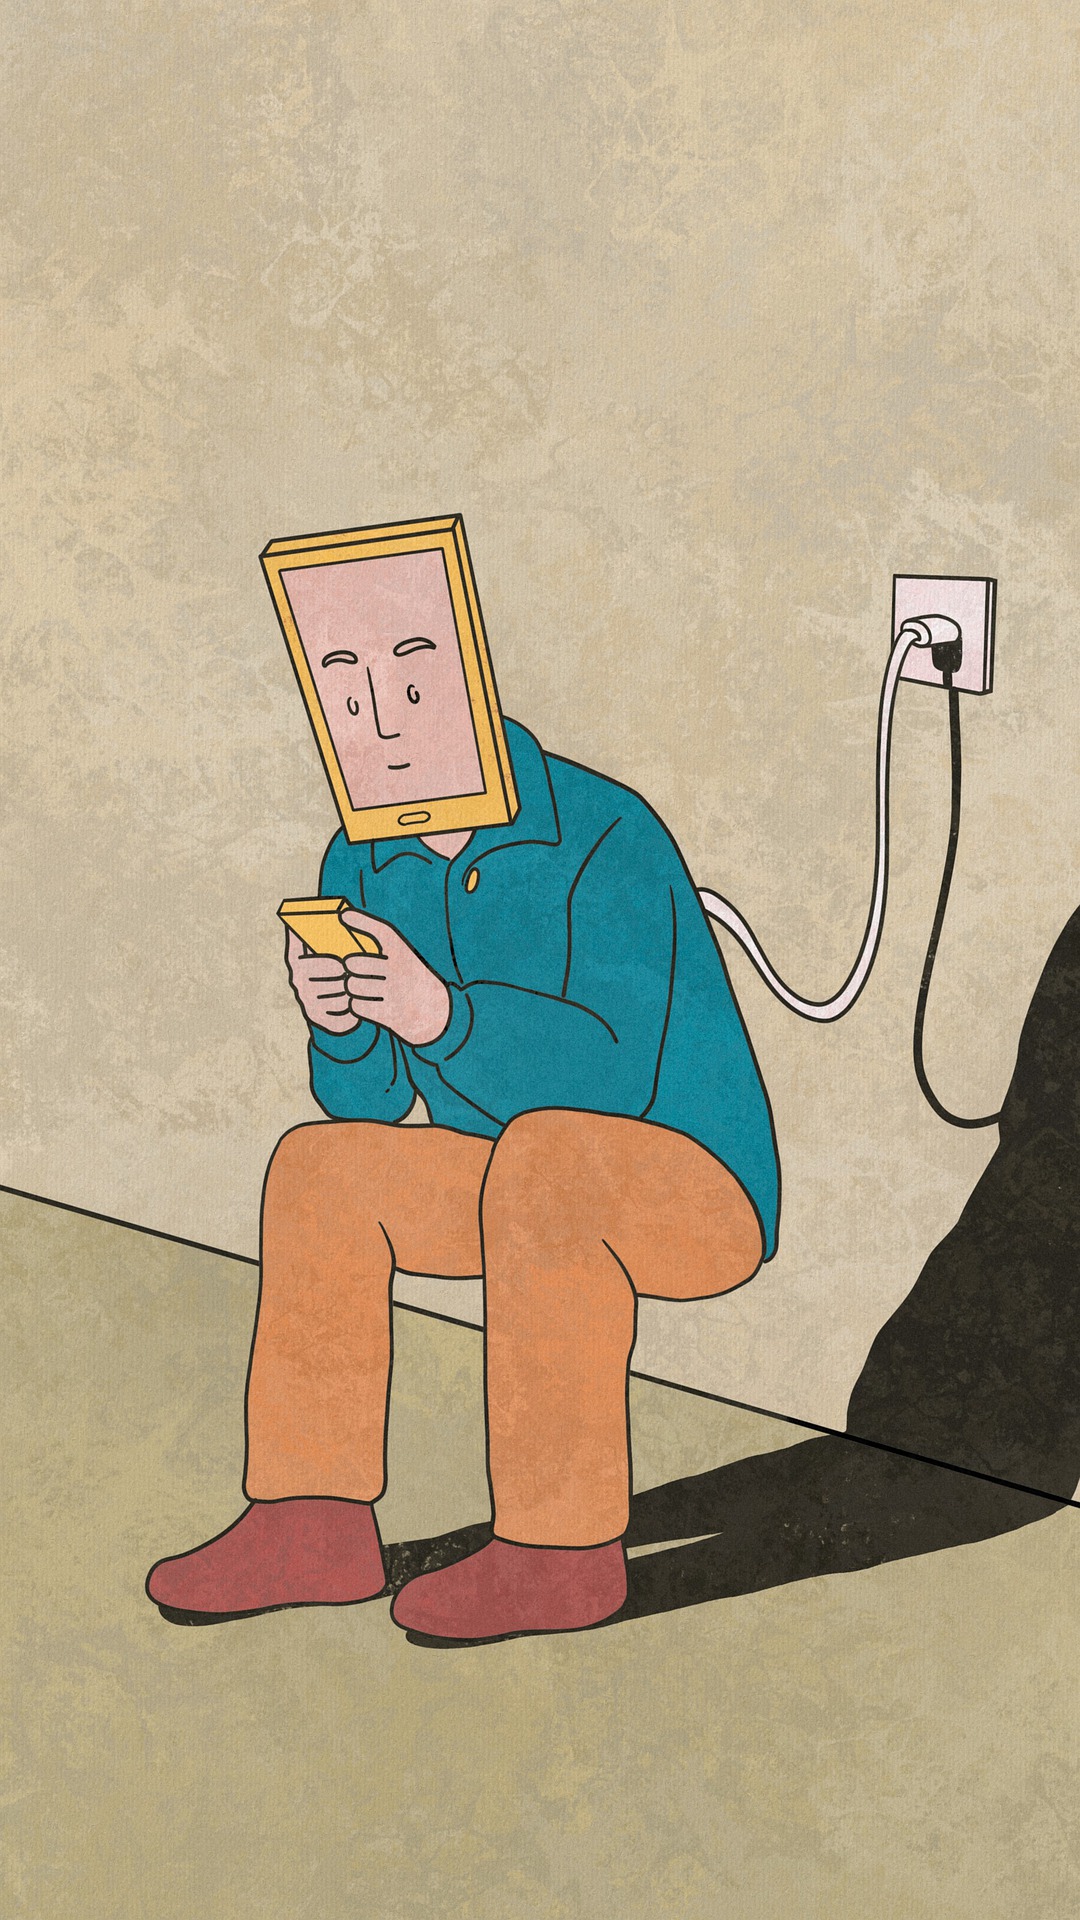 Illustration of a man becoming a phone representing addiction on social media